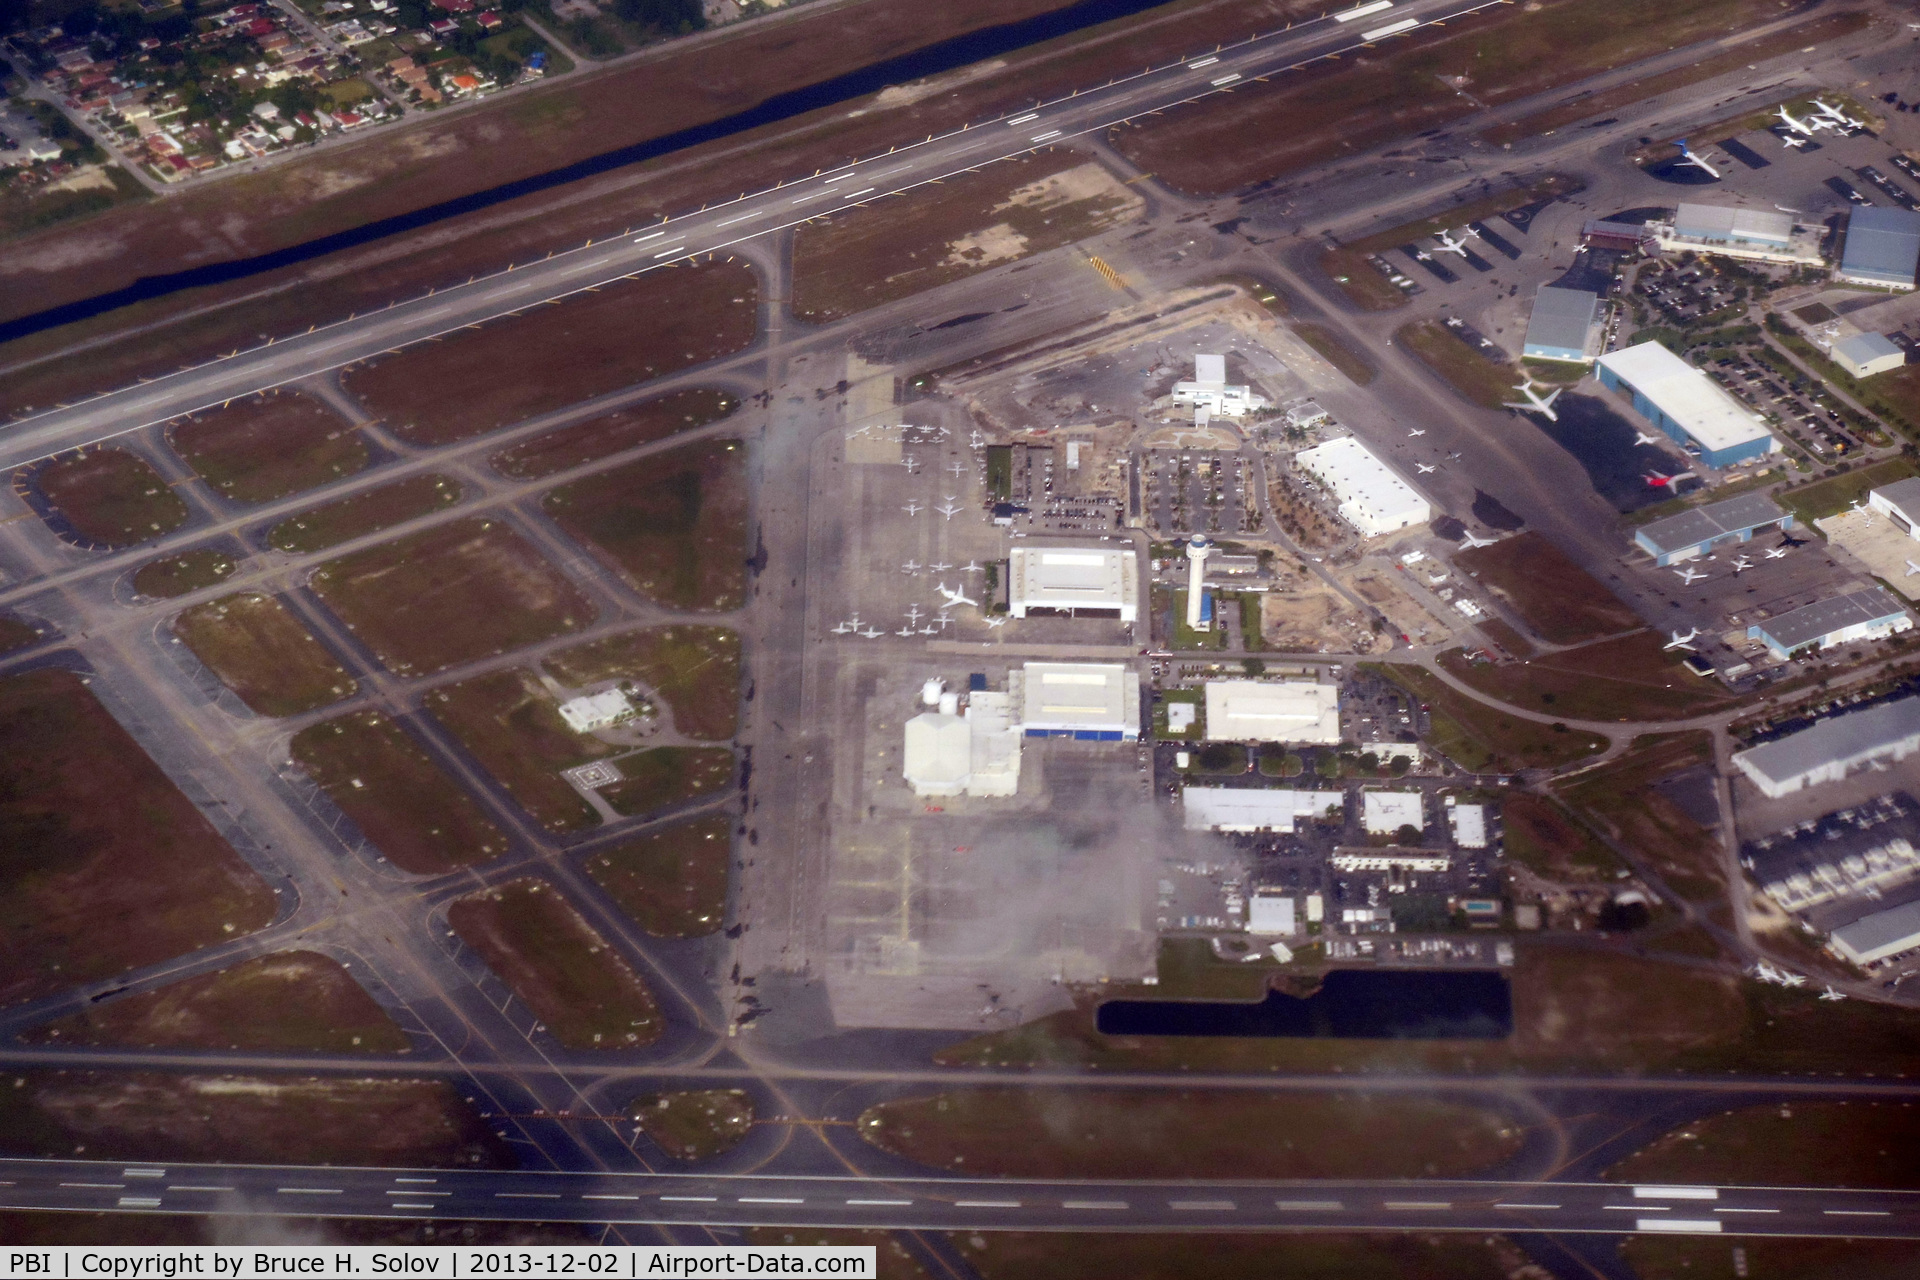 Palm Beach International Airport (PBI) - On approach to MIA, aerial view of the airport